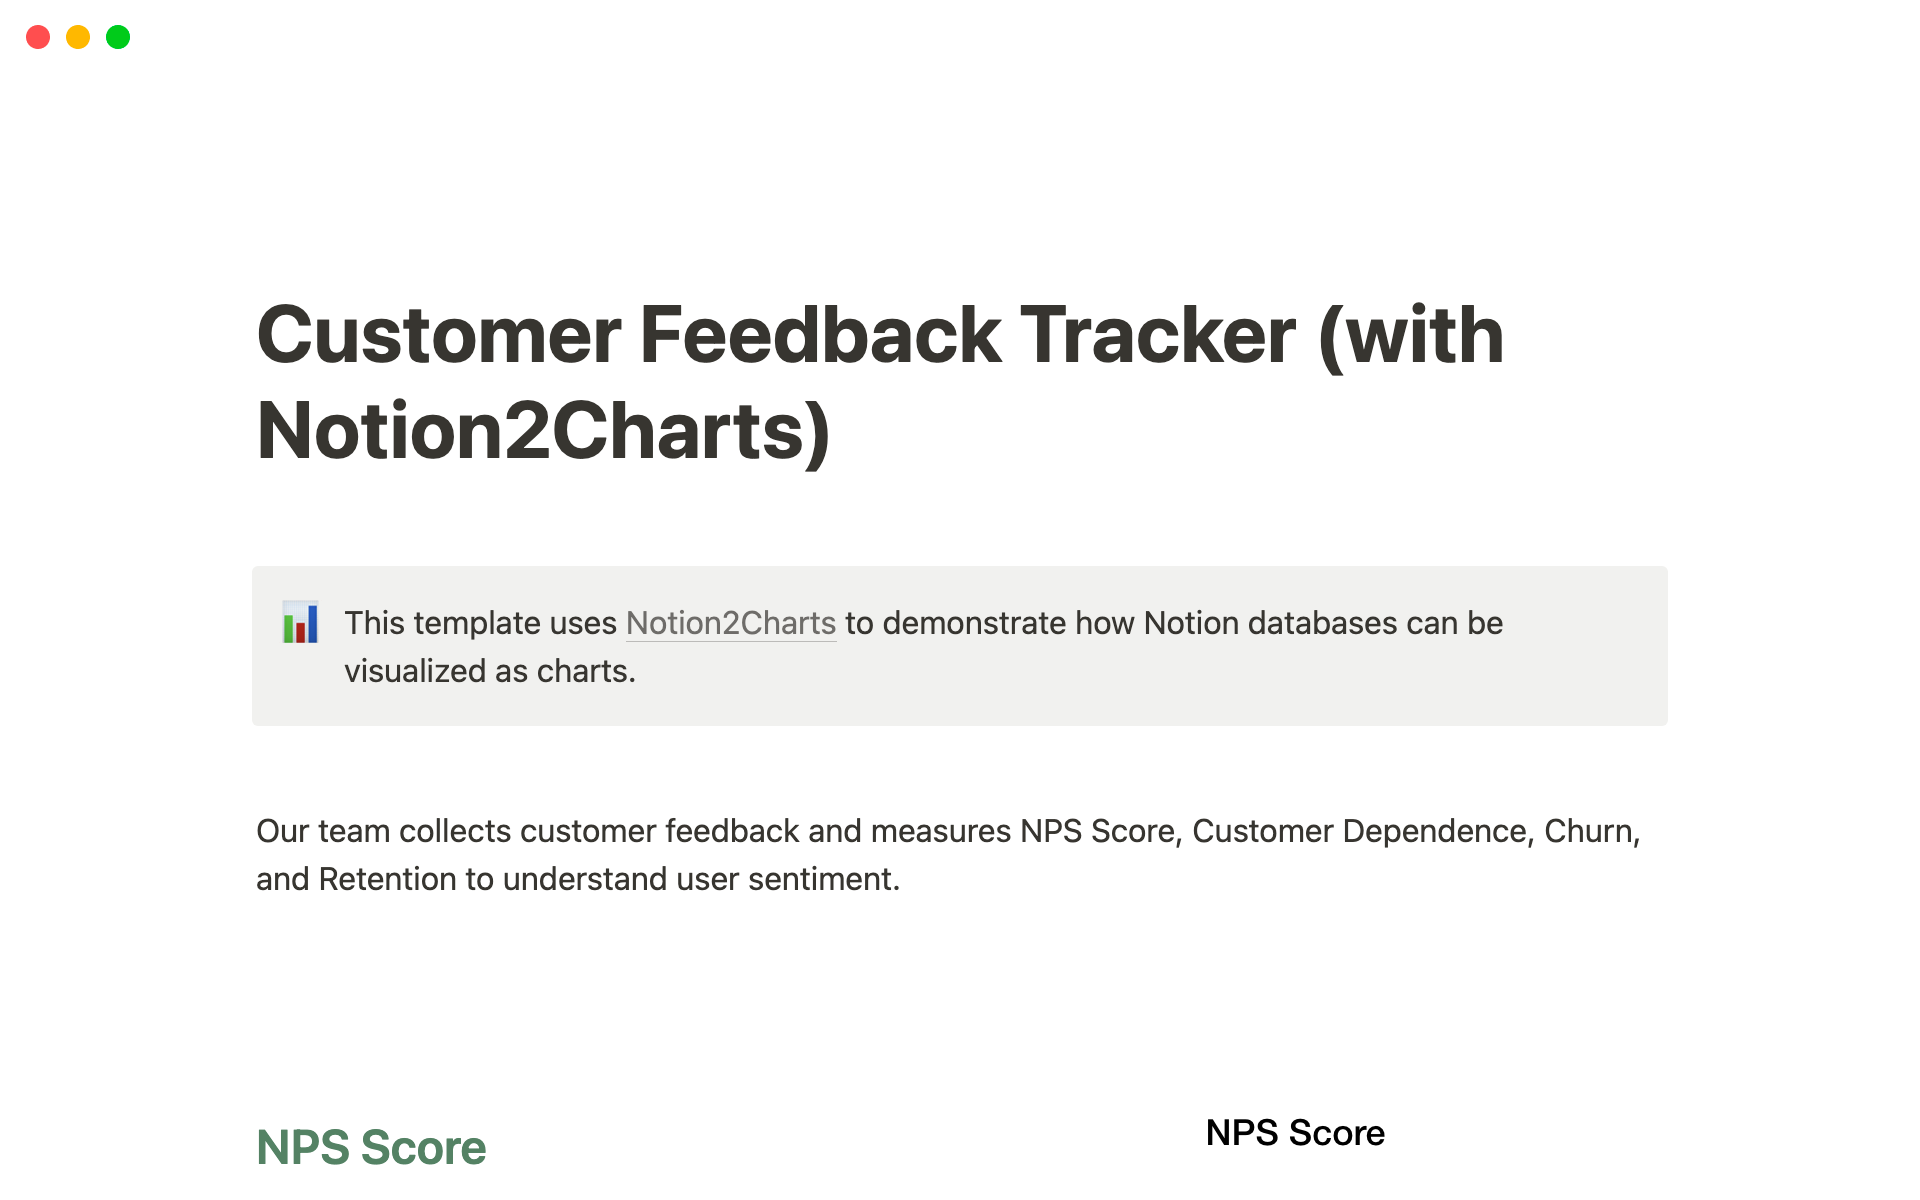 This template organizes customer feedback and graphs key metrics like NPS score and user retention using Notion2Charts.